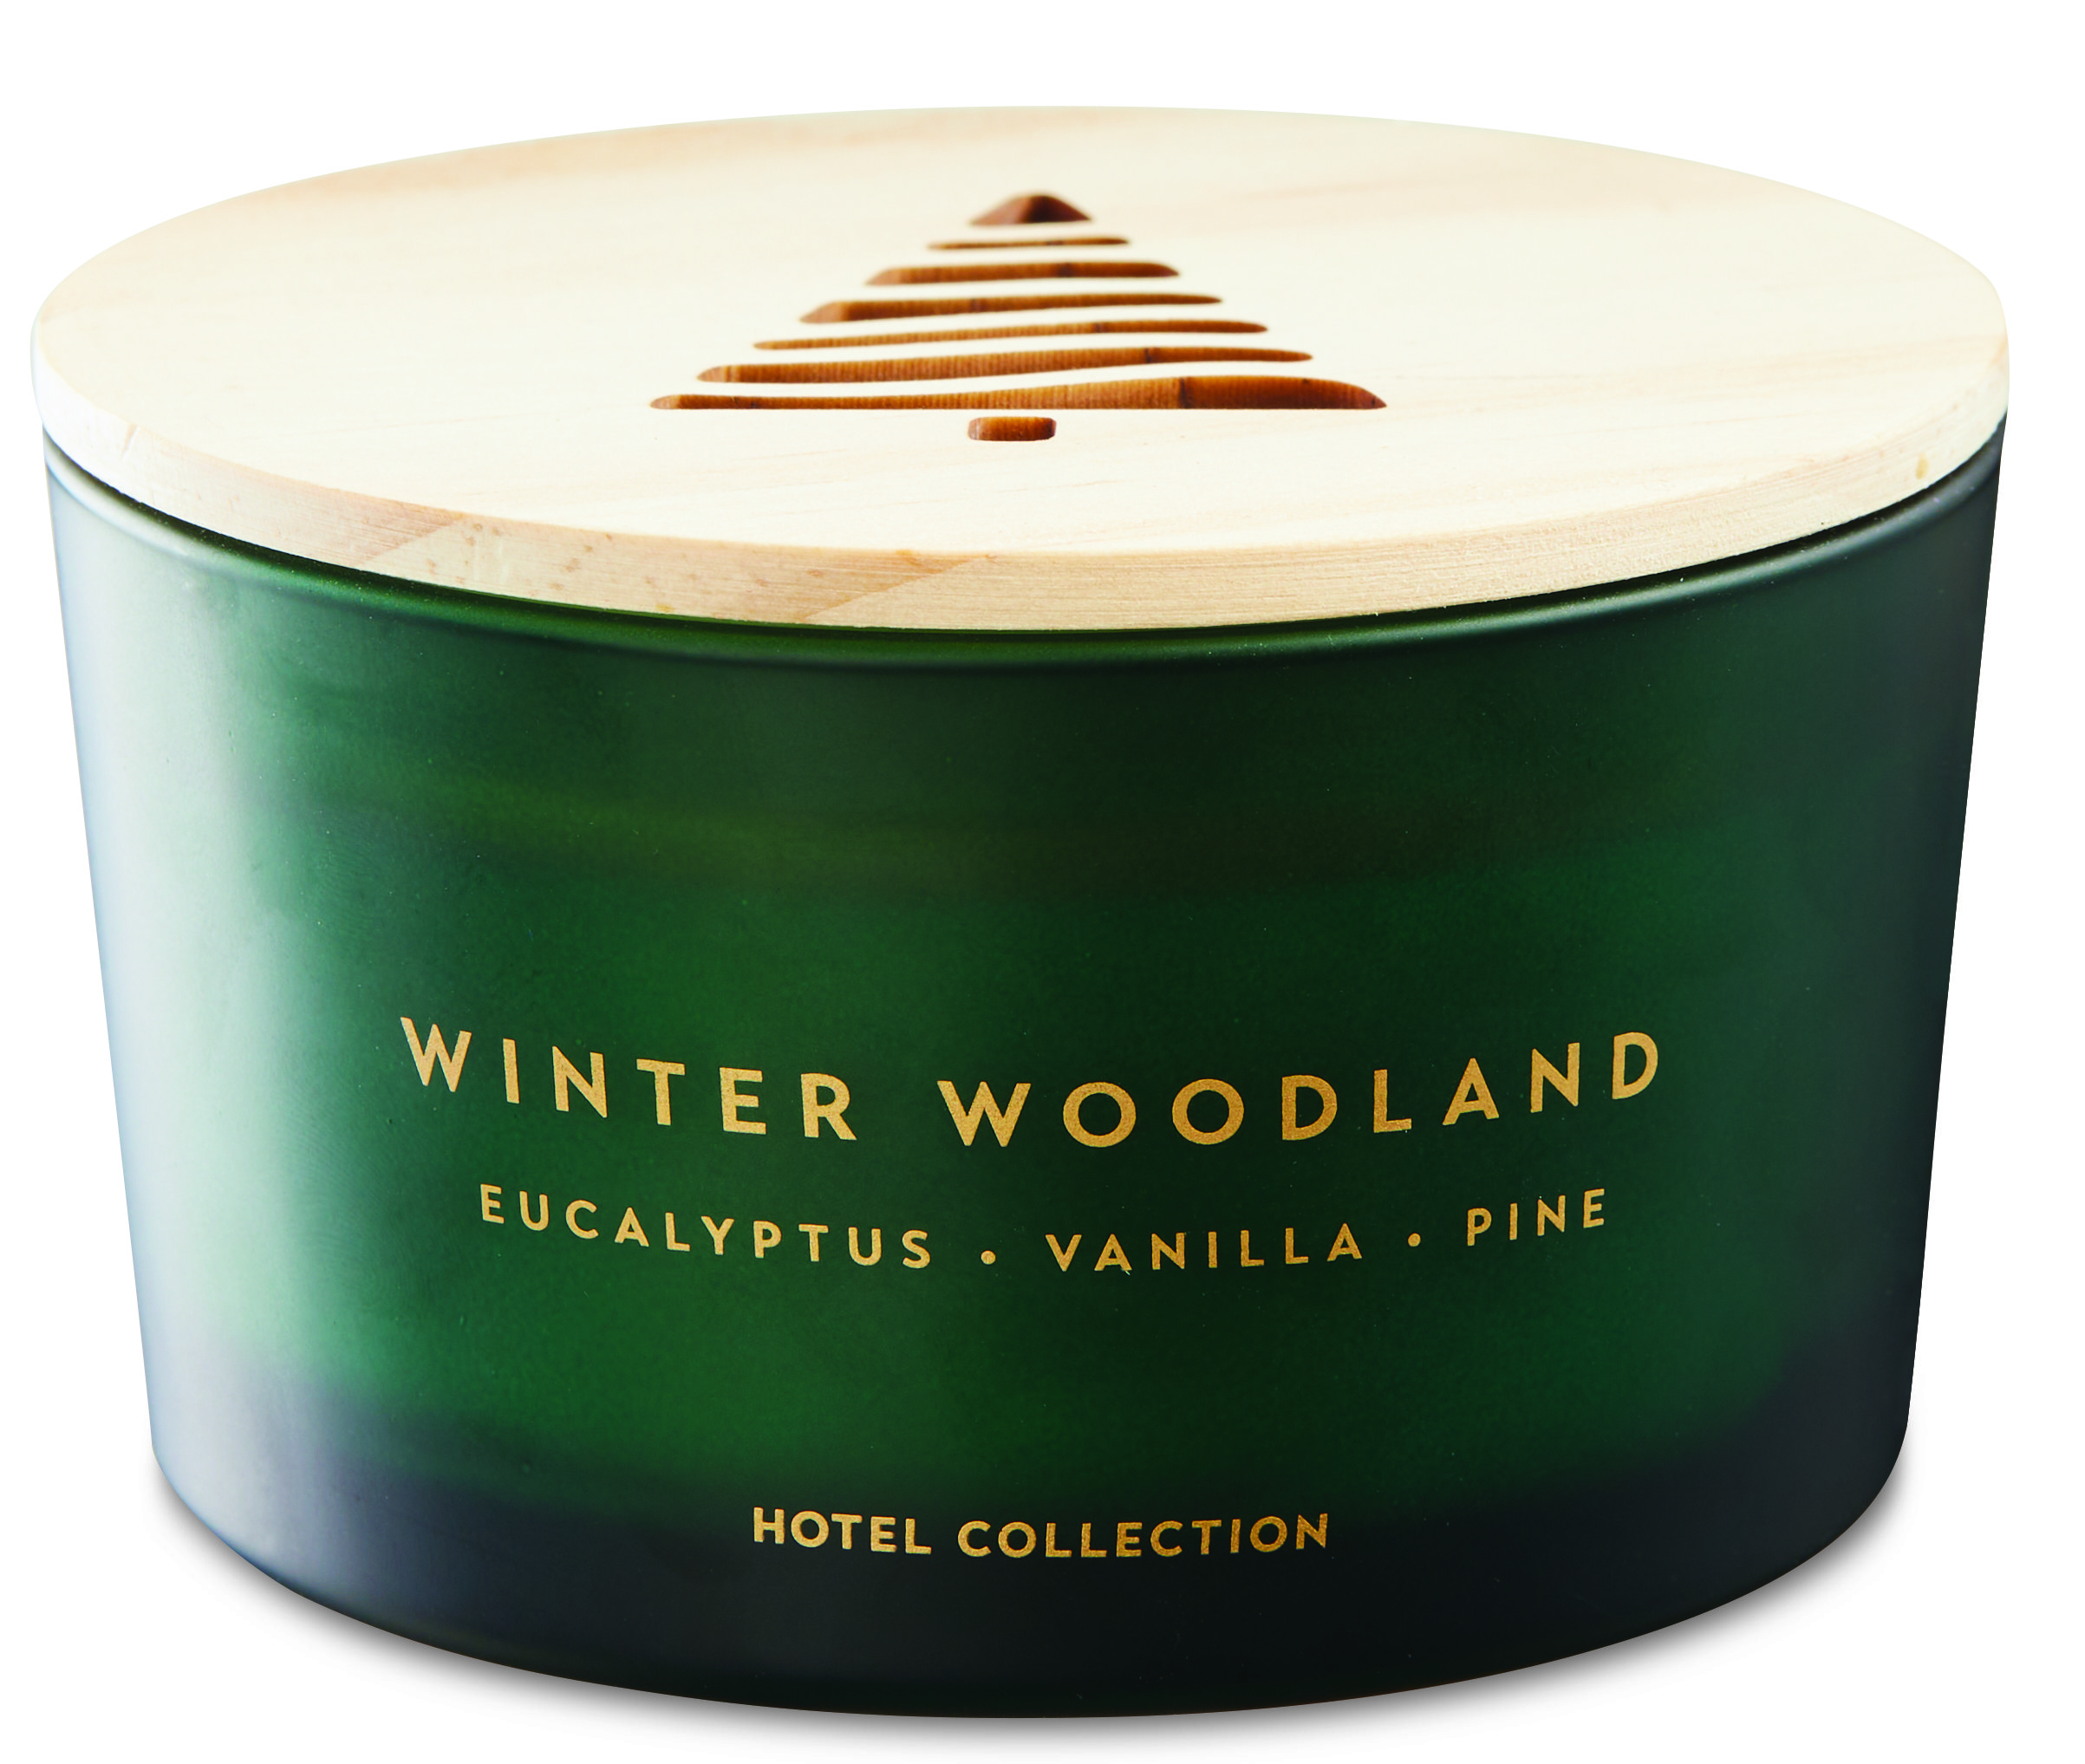 A dark green glass candle with a wooden lid with a tree shape cut out.